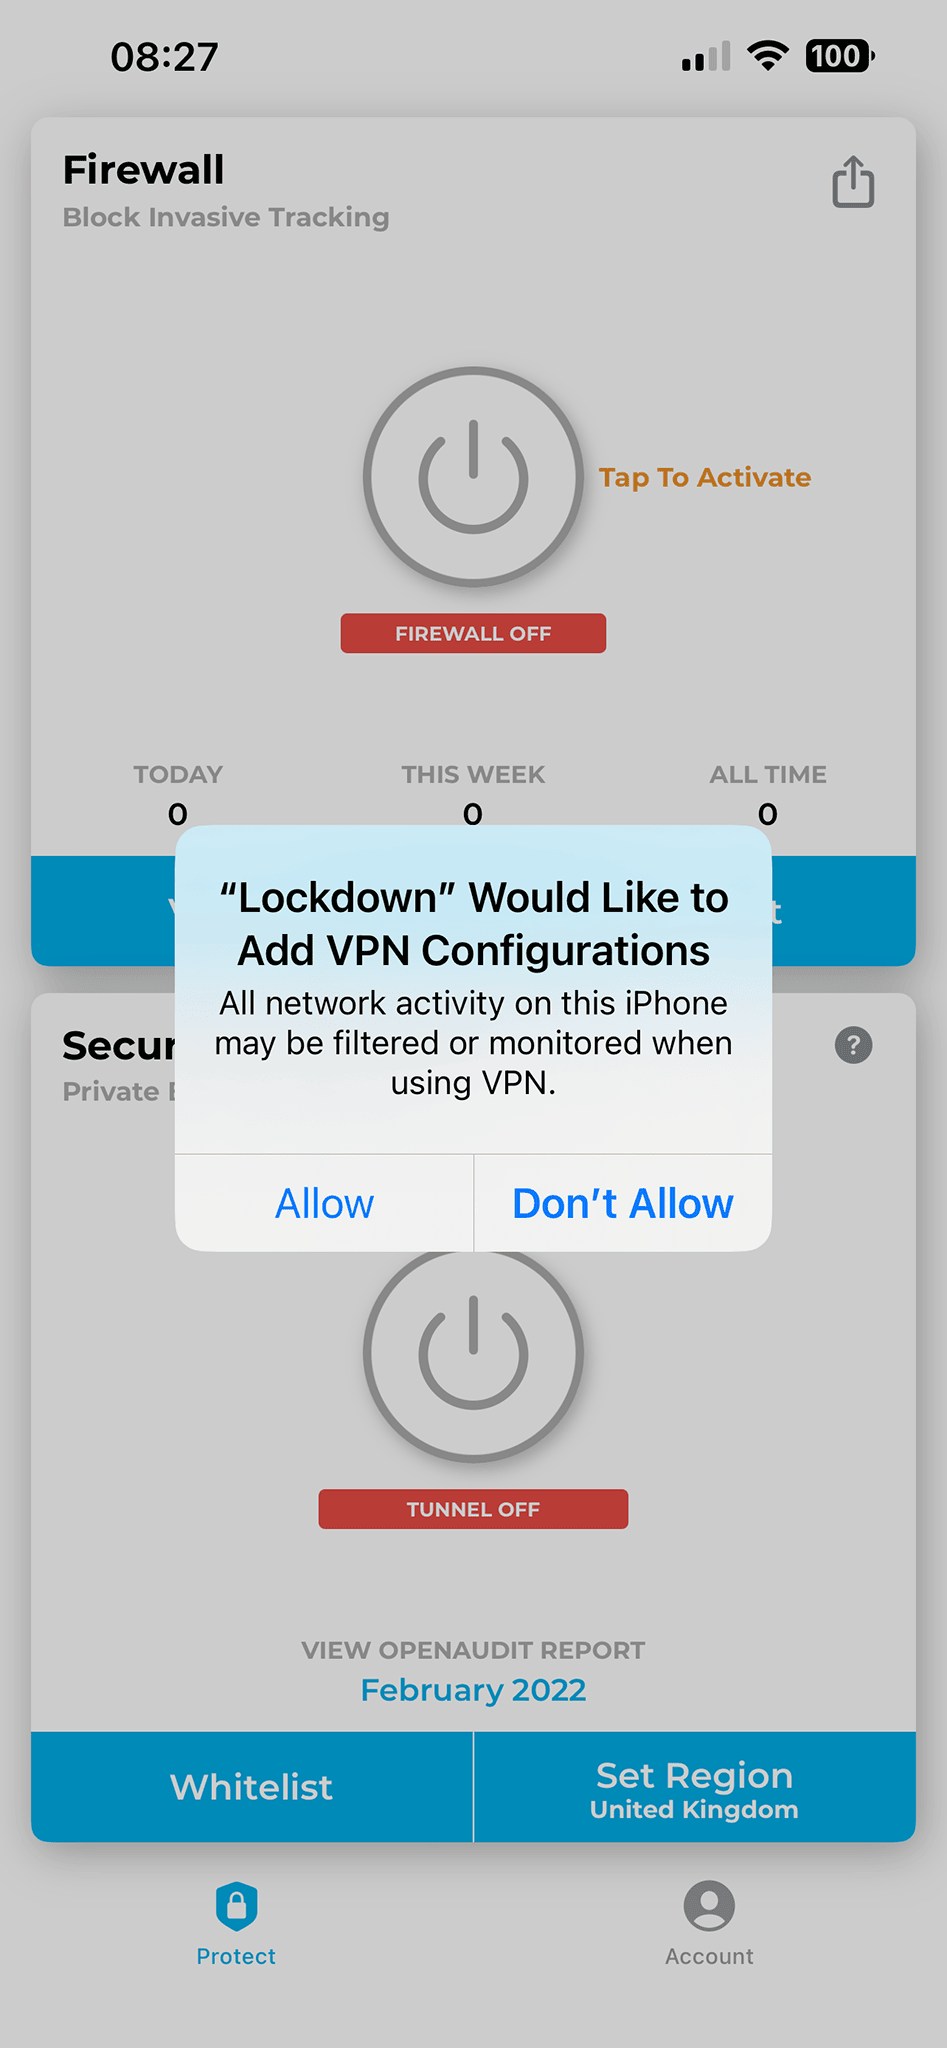 Lockdown Privacy - Lockdown would like to Add VPN Configurations